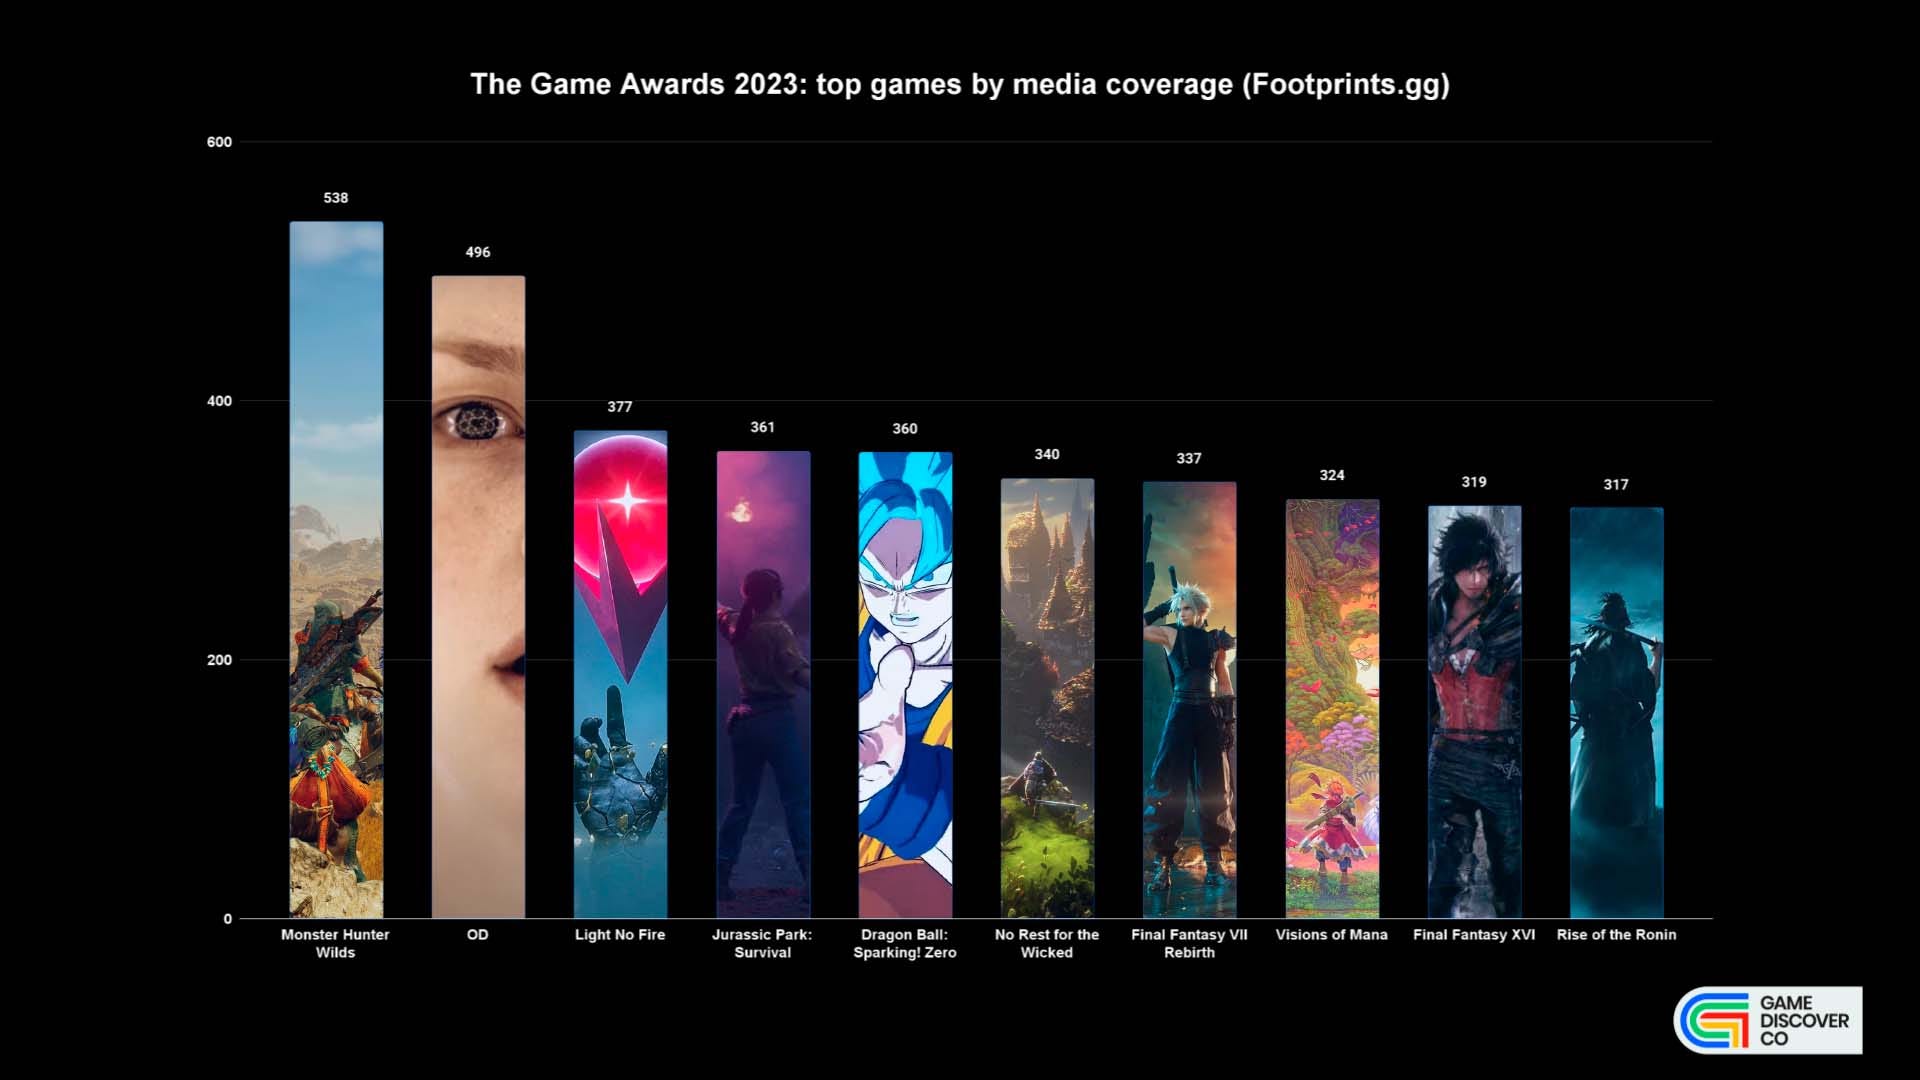 Hideo Kojima's OD, Marvel's Blade and new Monster Hunter led The Game  Awards 2023 reveals